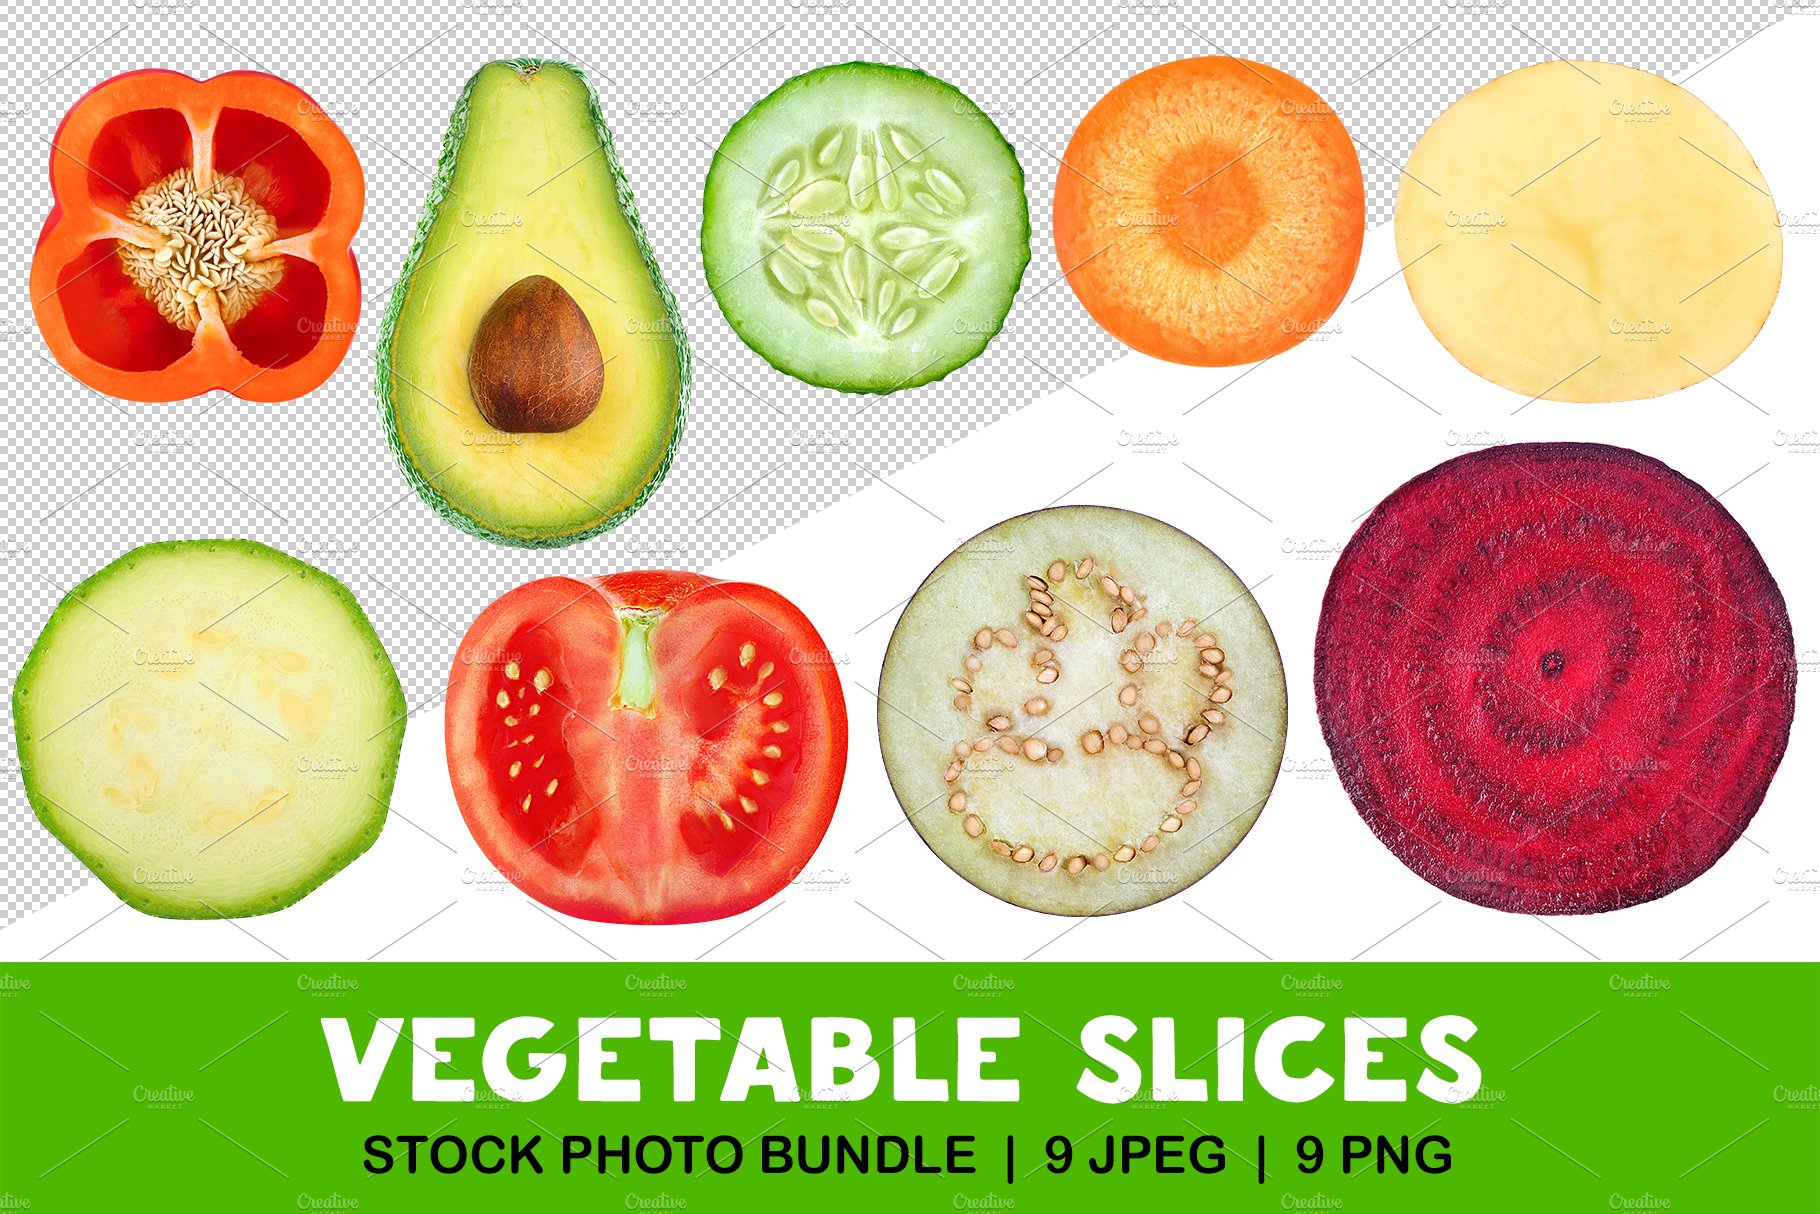 Vegetable slices cover image.